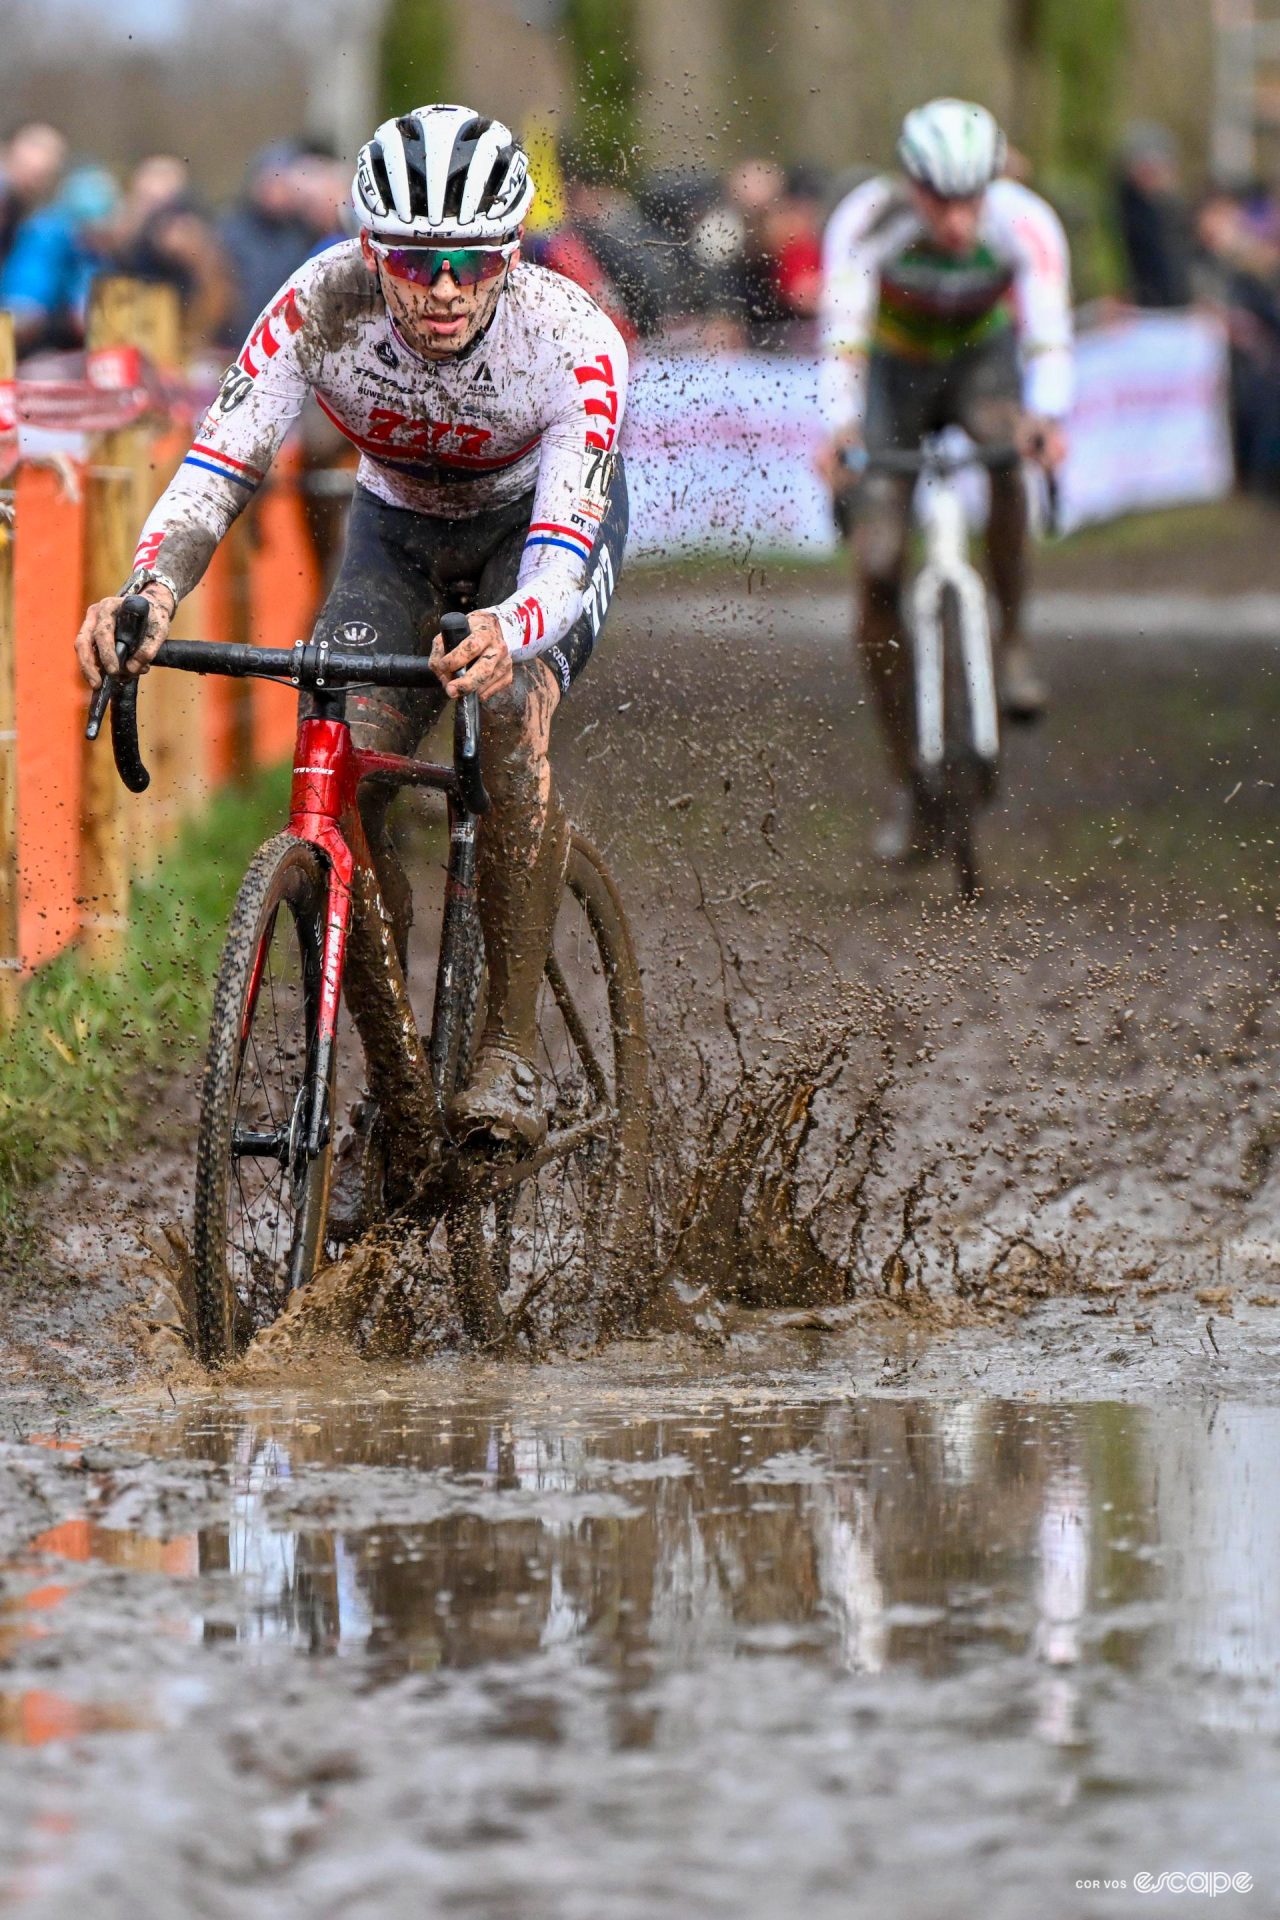 British national champion Cameron Mason enters a muddy puddle during Hexia Cyclocross Gullegem.